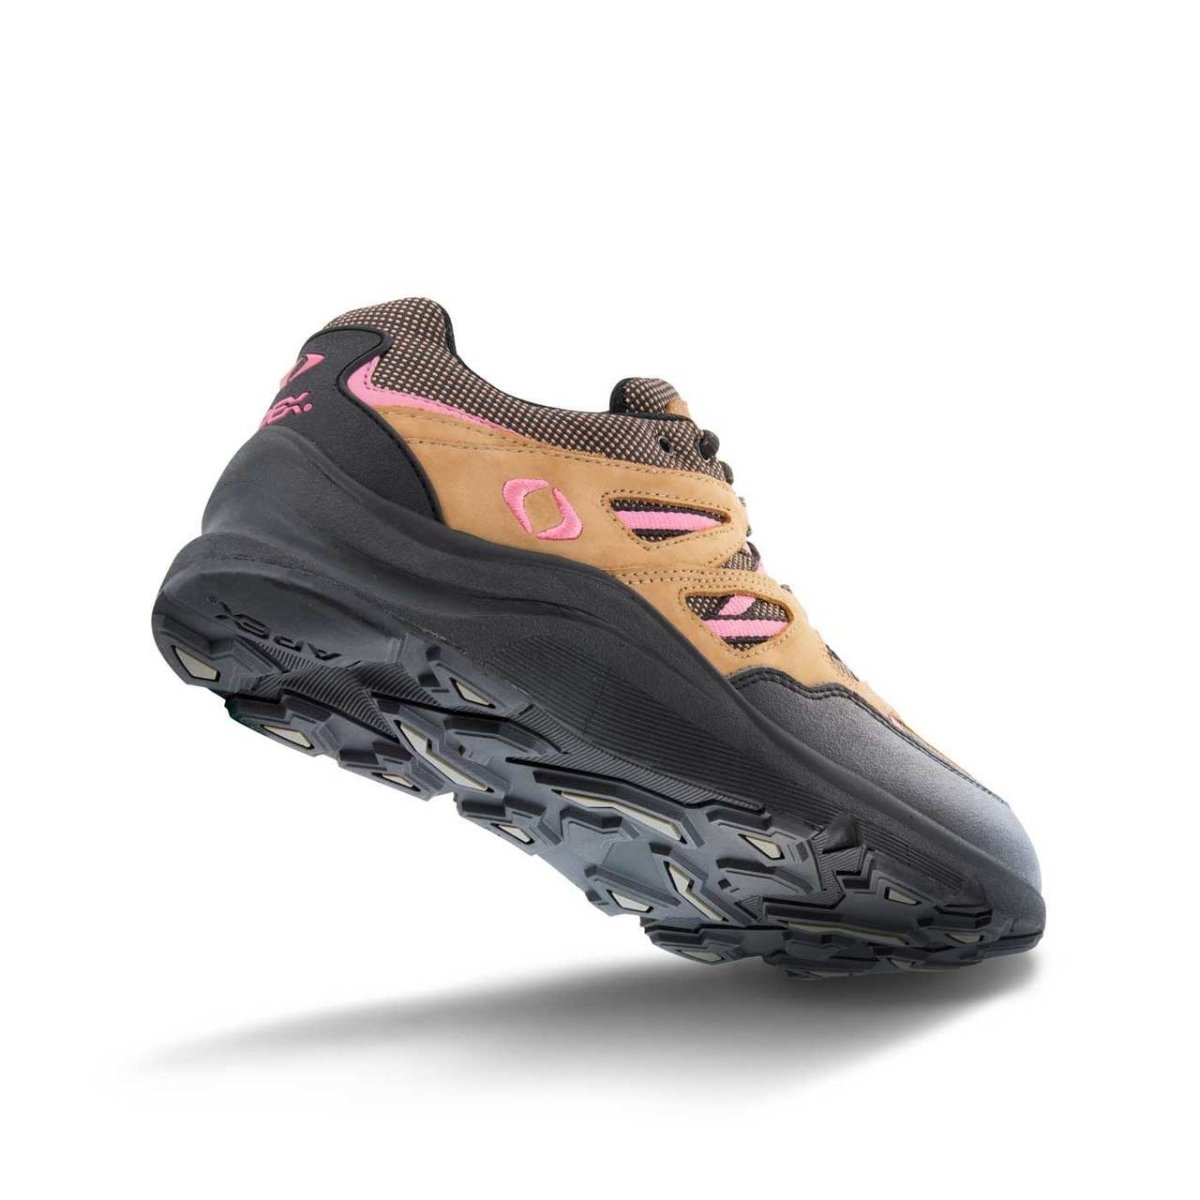 APEX V752 SIERRA TRAIL RUN WOMEN'S ACTIVE SHOE IN BROWN/PINK - TLW Shoes